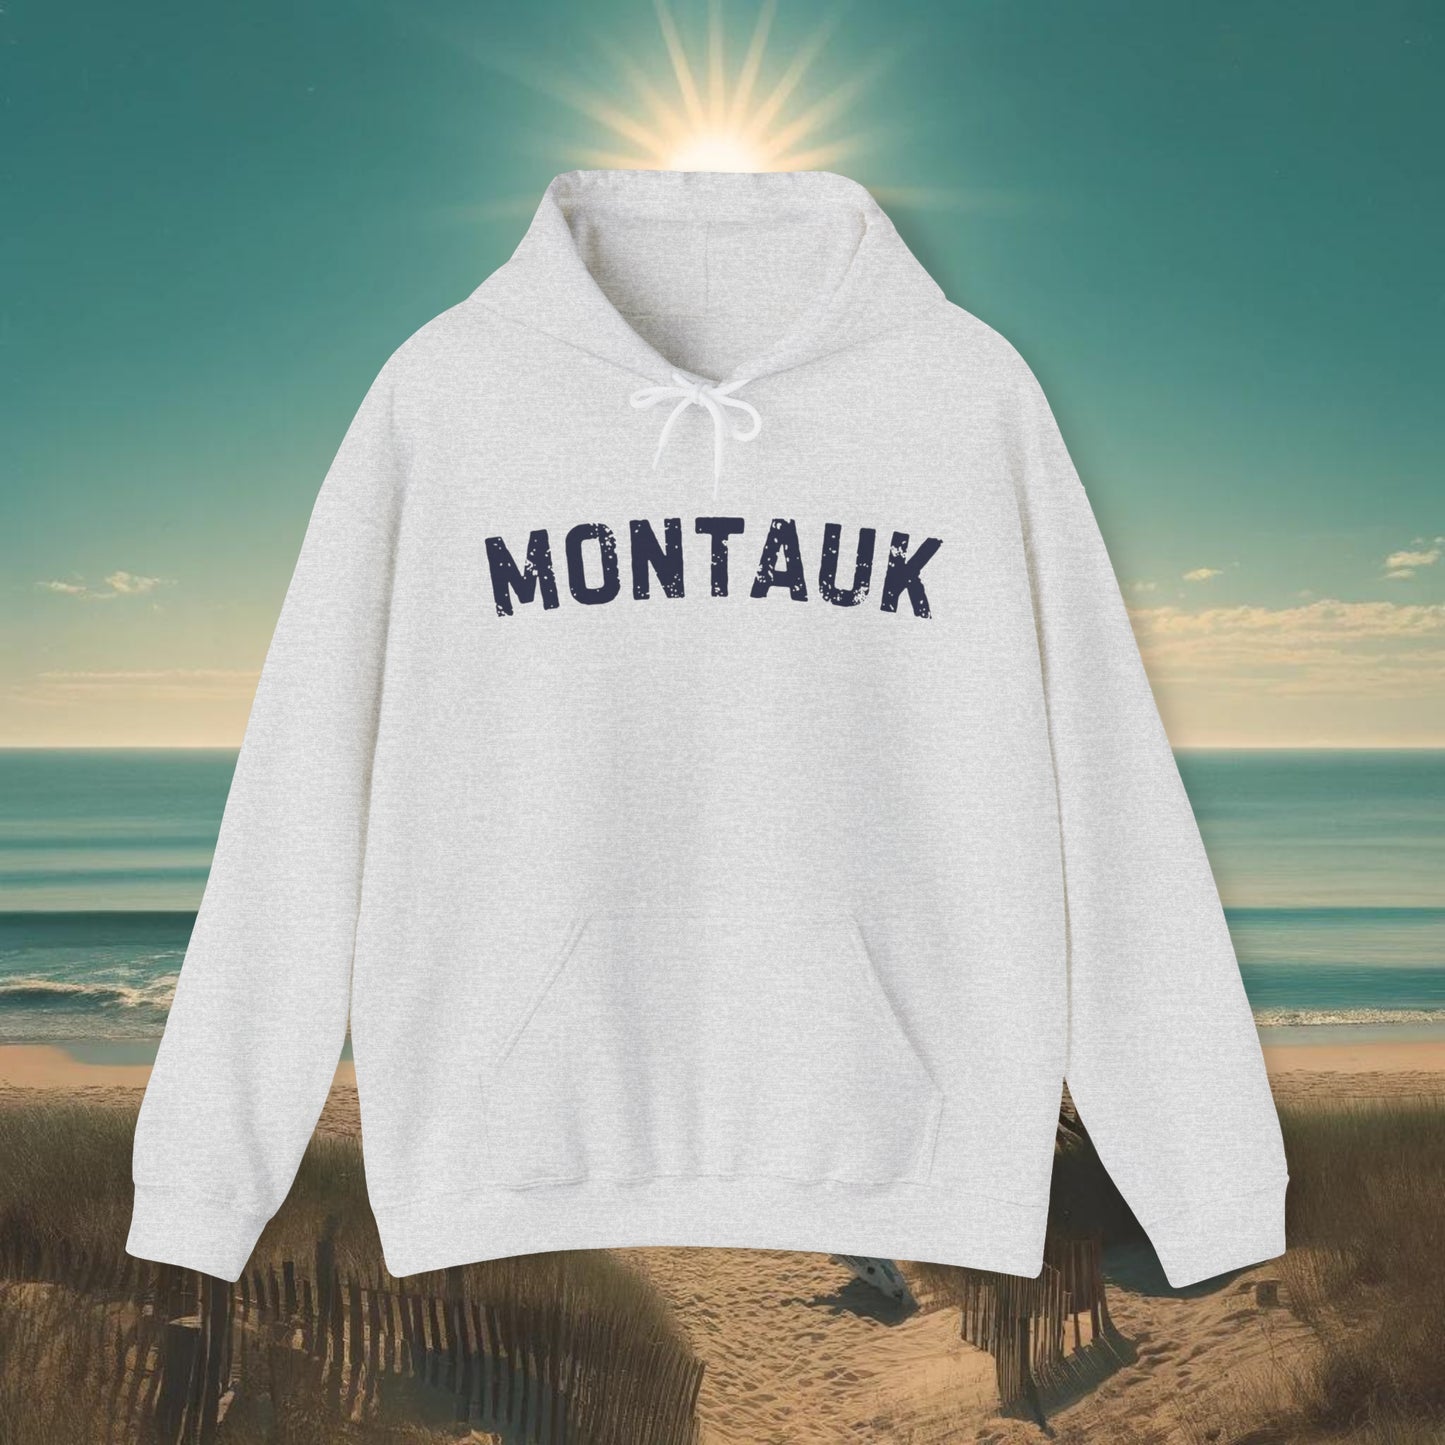 Montauk Essential Cozy Hoodie - Unisex, Cotton-Poly Blend for Ultimate Comfort